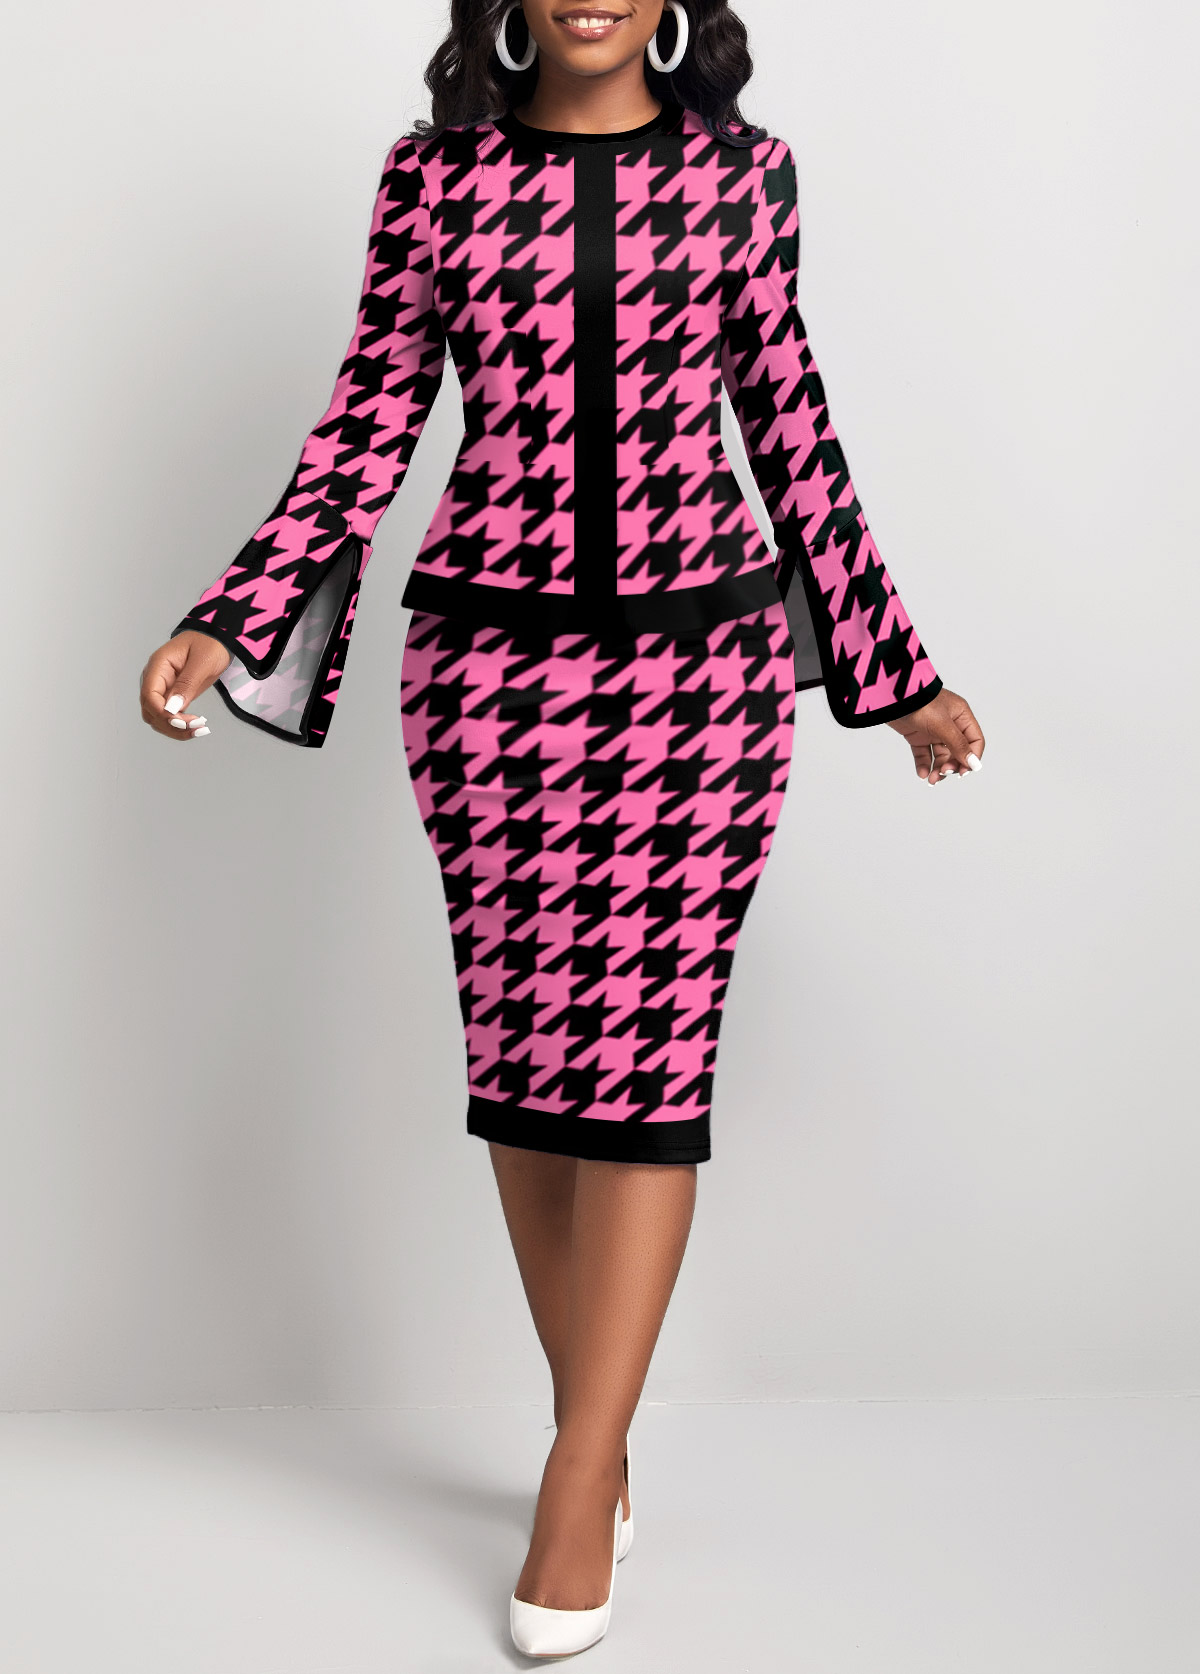 ROTITA Two Piece Houndstooth Print Hot Pink Top and Skirt